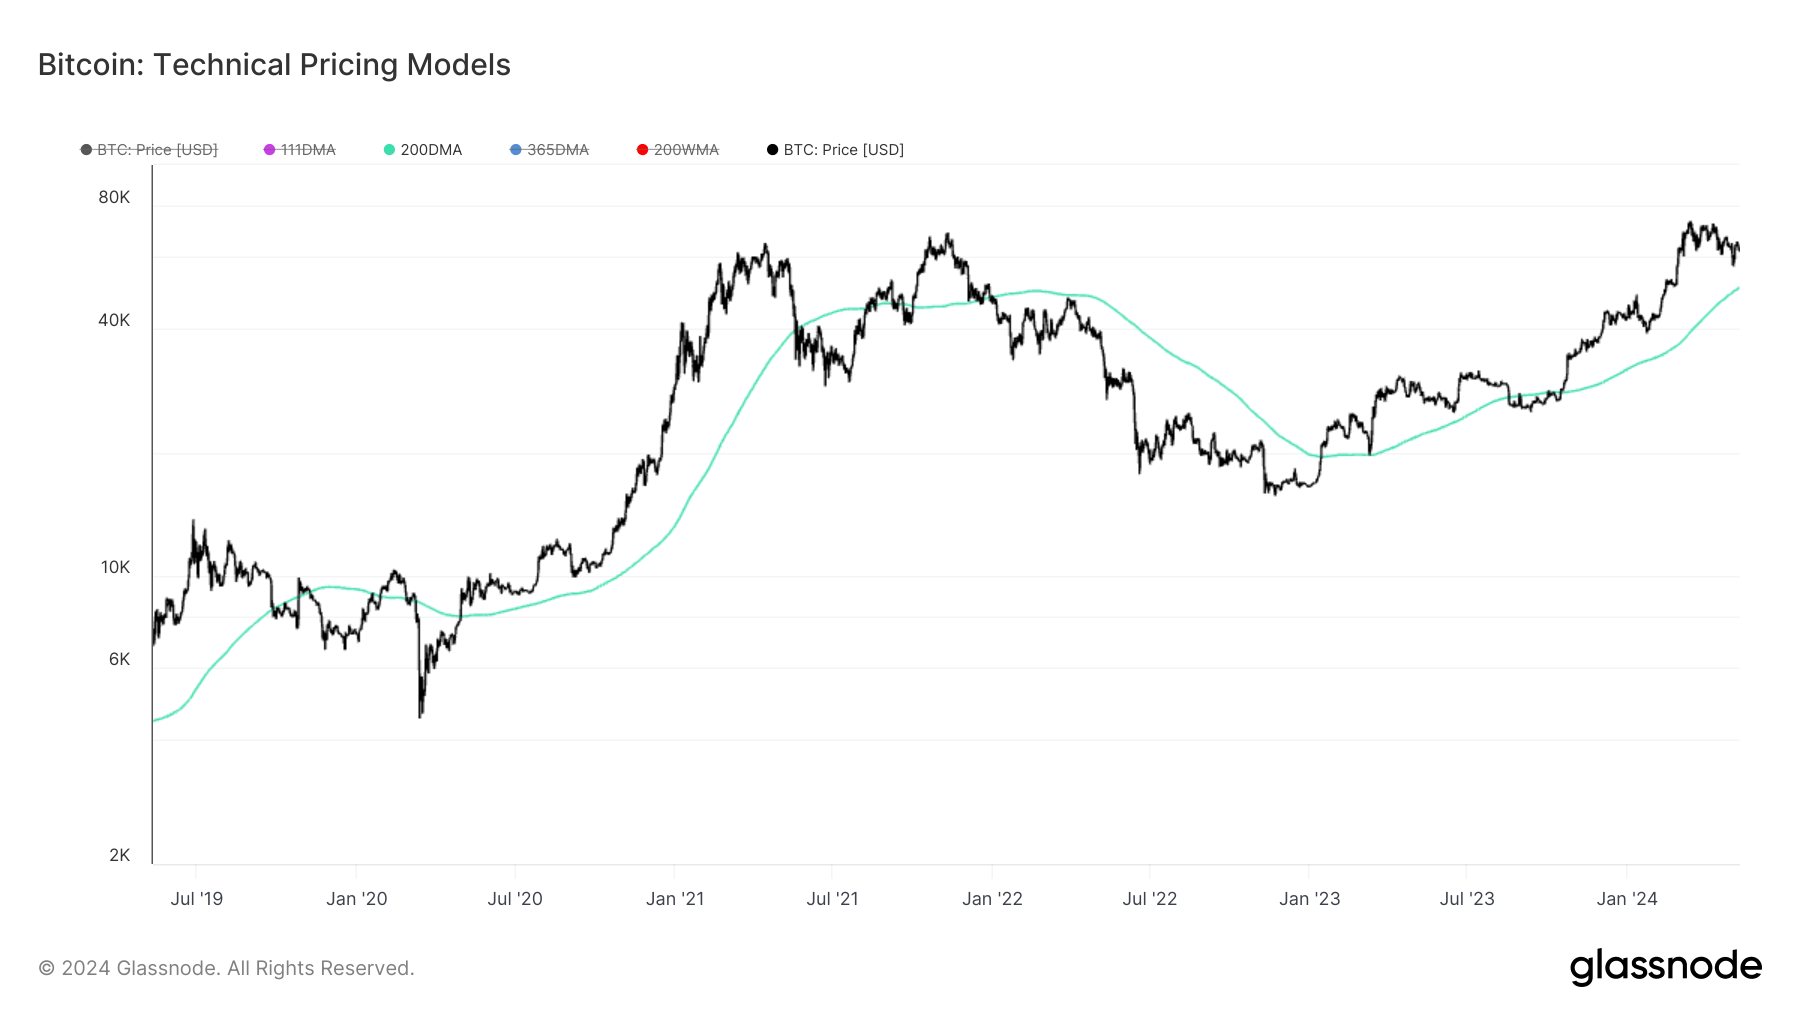 Technical Pricing Models, 200Dma: July '19 - May '24: (Source: Glassnode)